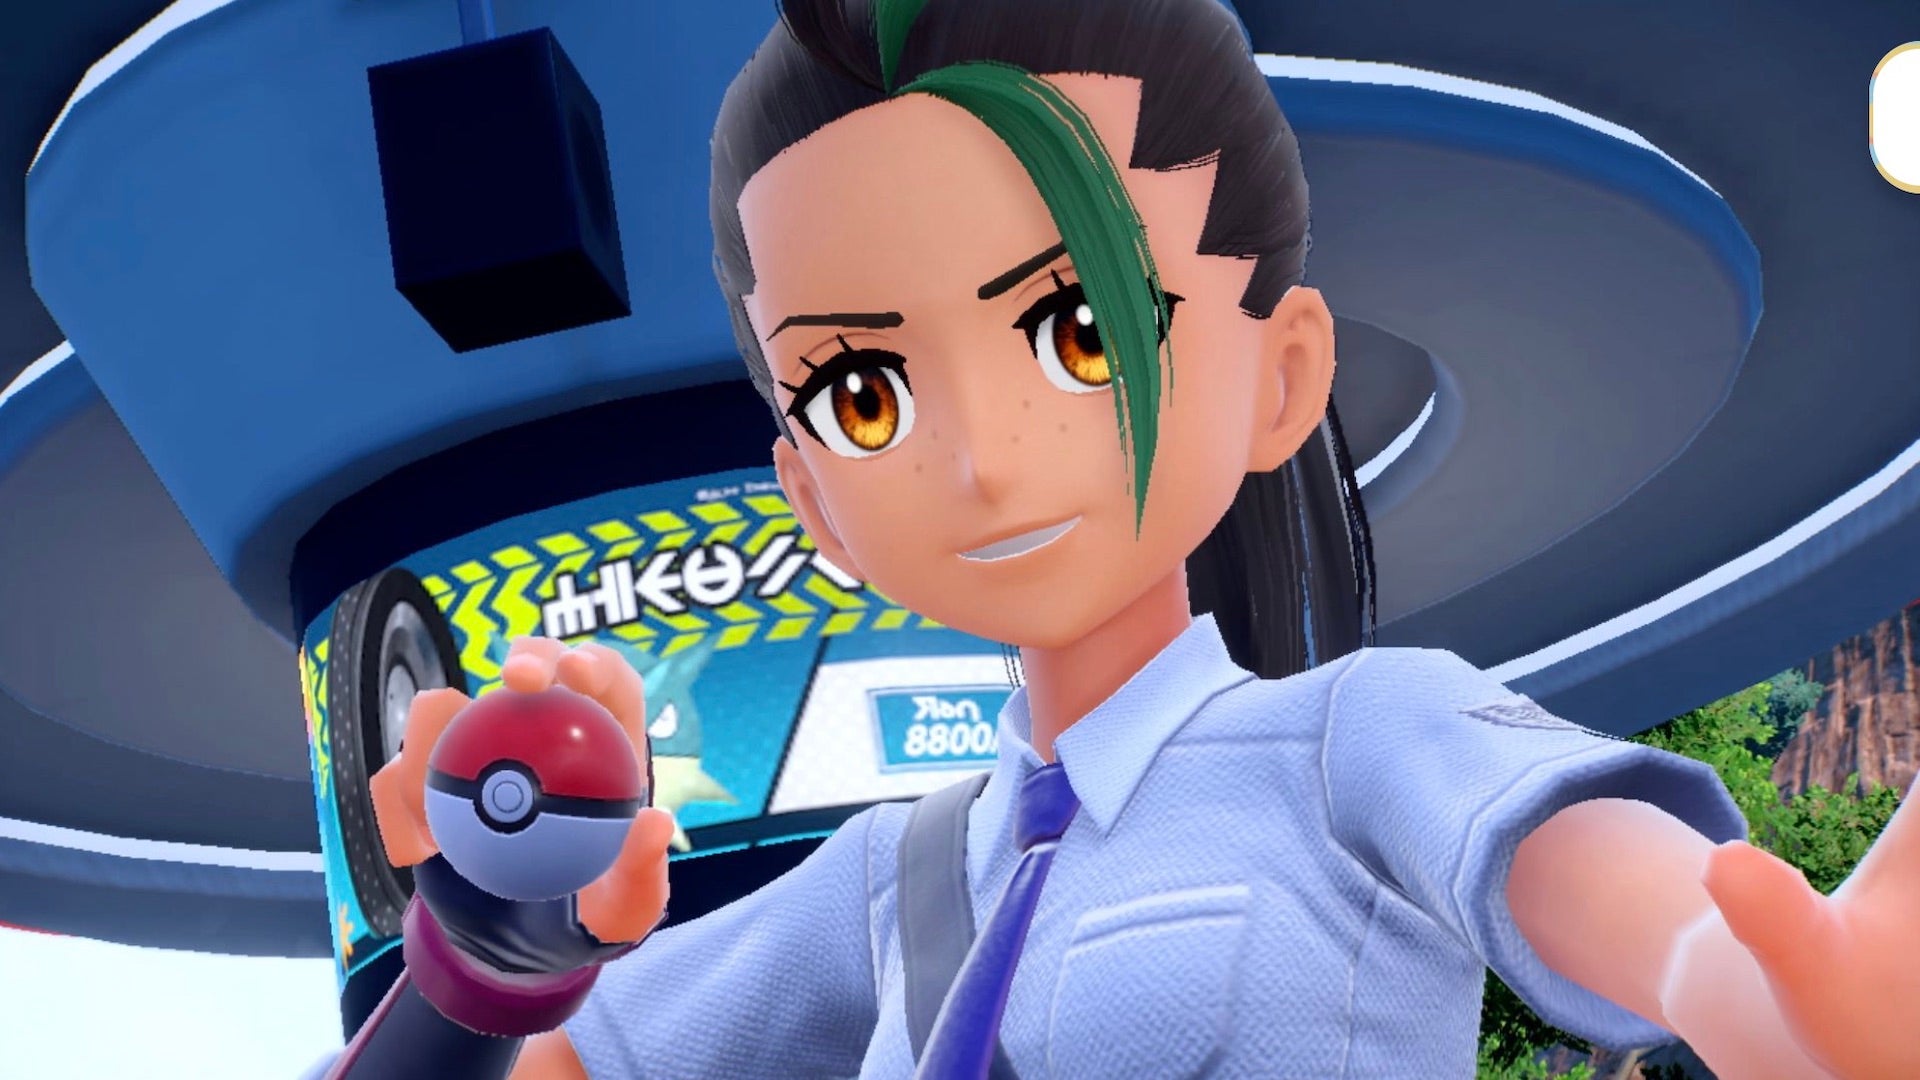 A Pokemon Trainer with green hair faces the camera holding a Poke Ball in their right hand